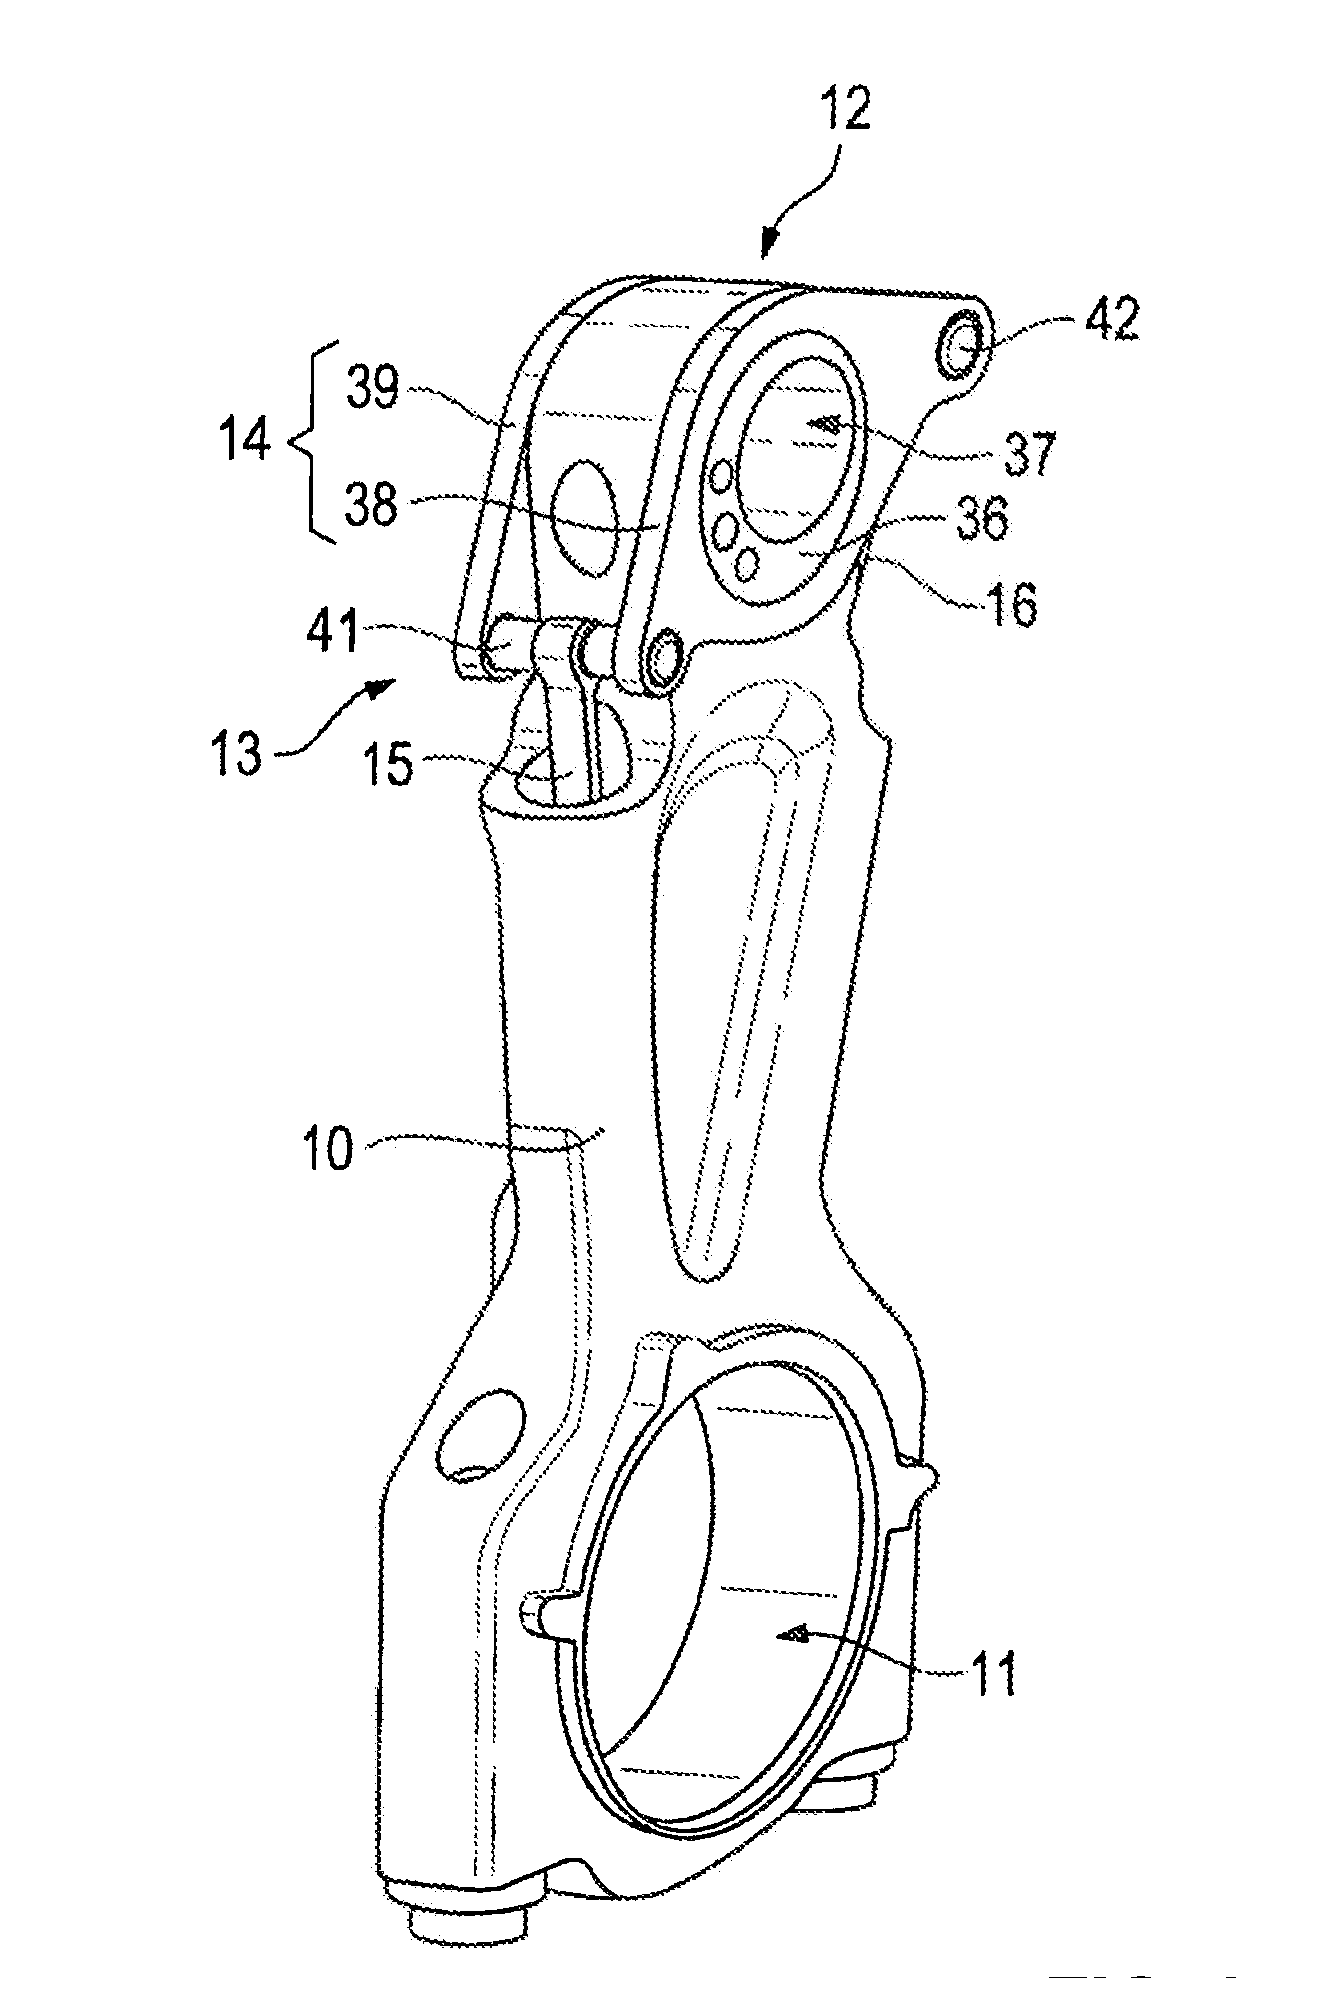 Internal combustion engine and connecting rod